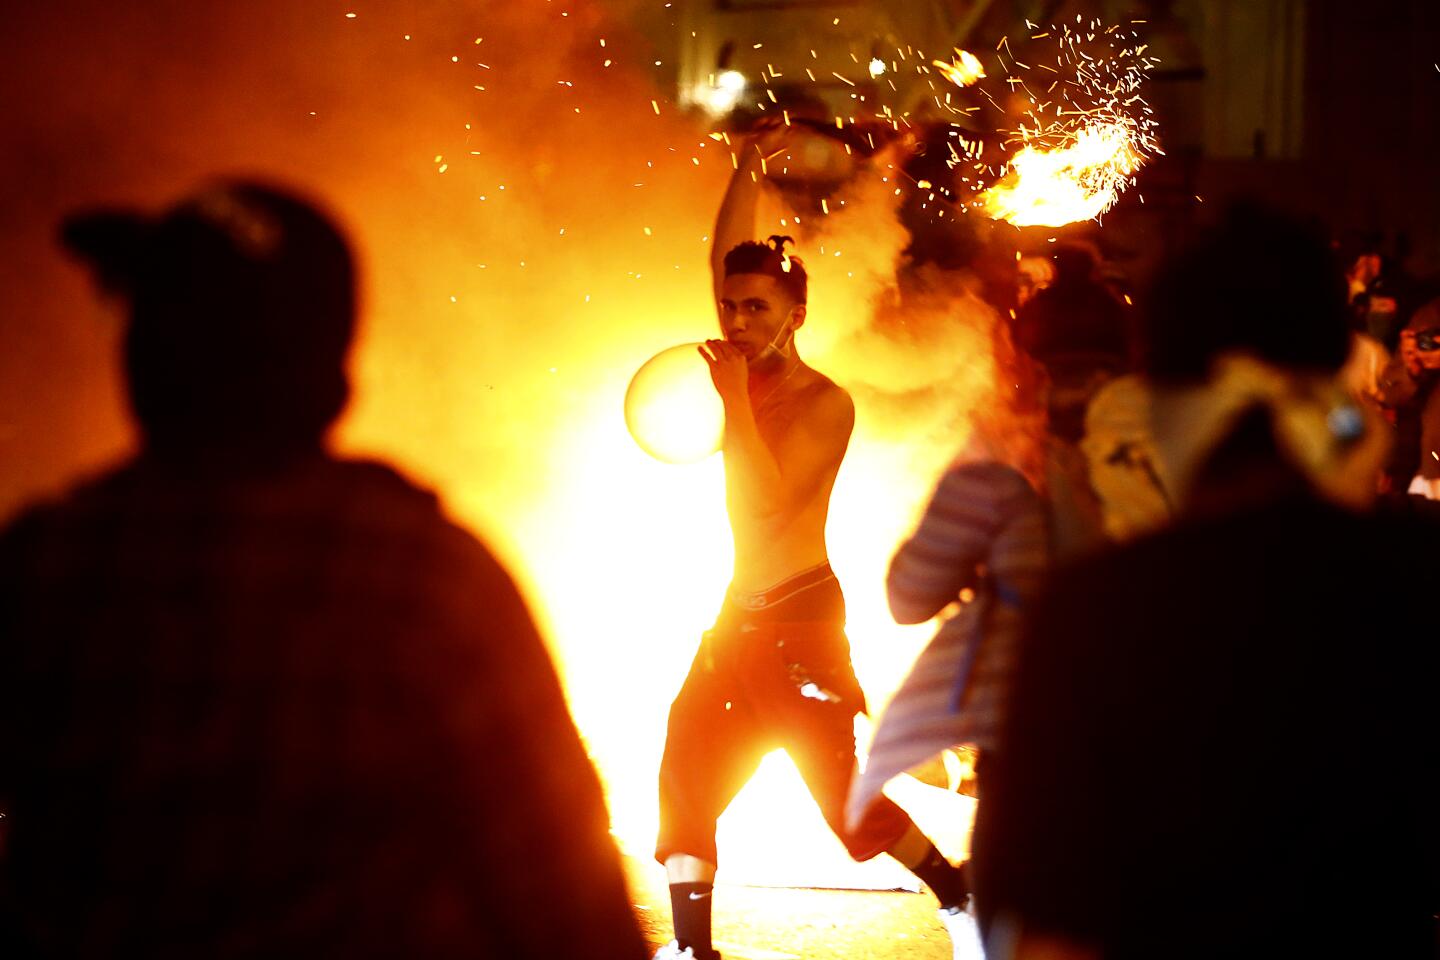 Protesters gather around a fire in the middle of a downtown L.A. street on Friday.